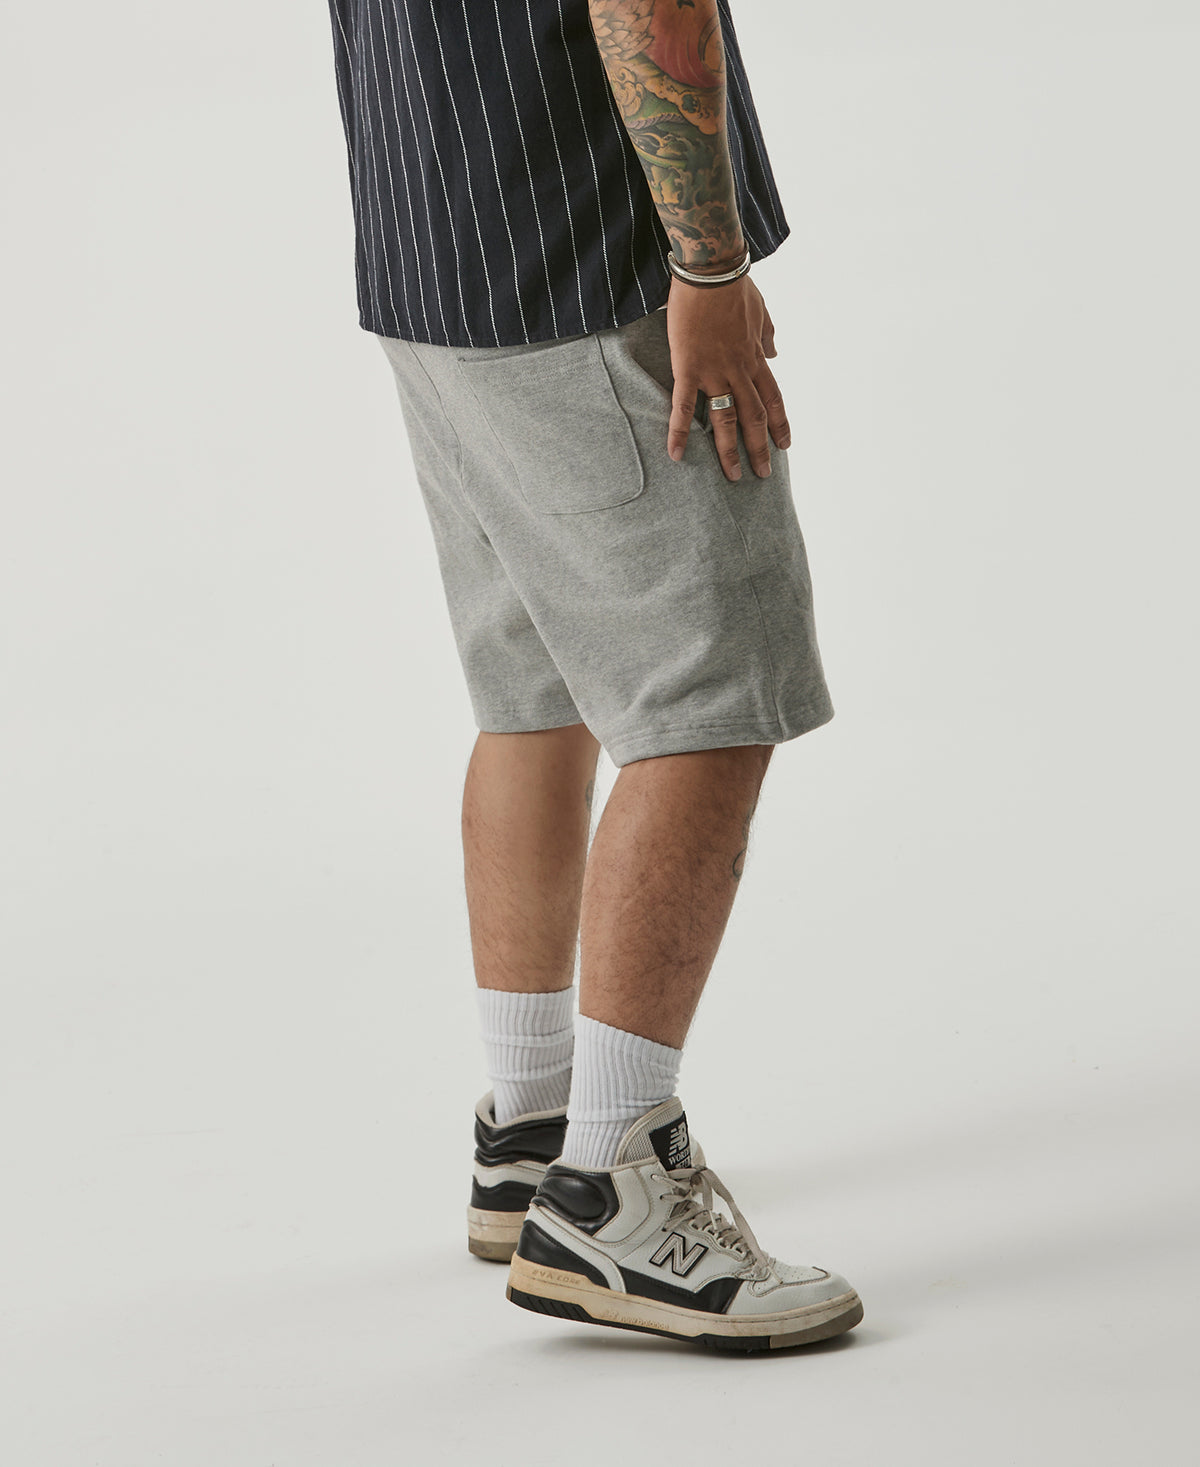 15 oz French Terry Sweat Shorts - Gray